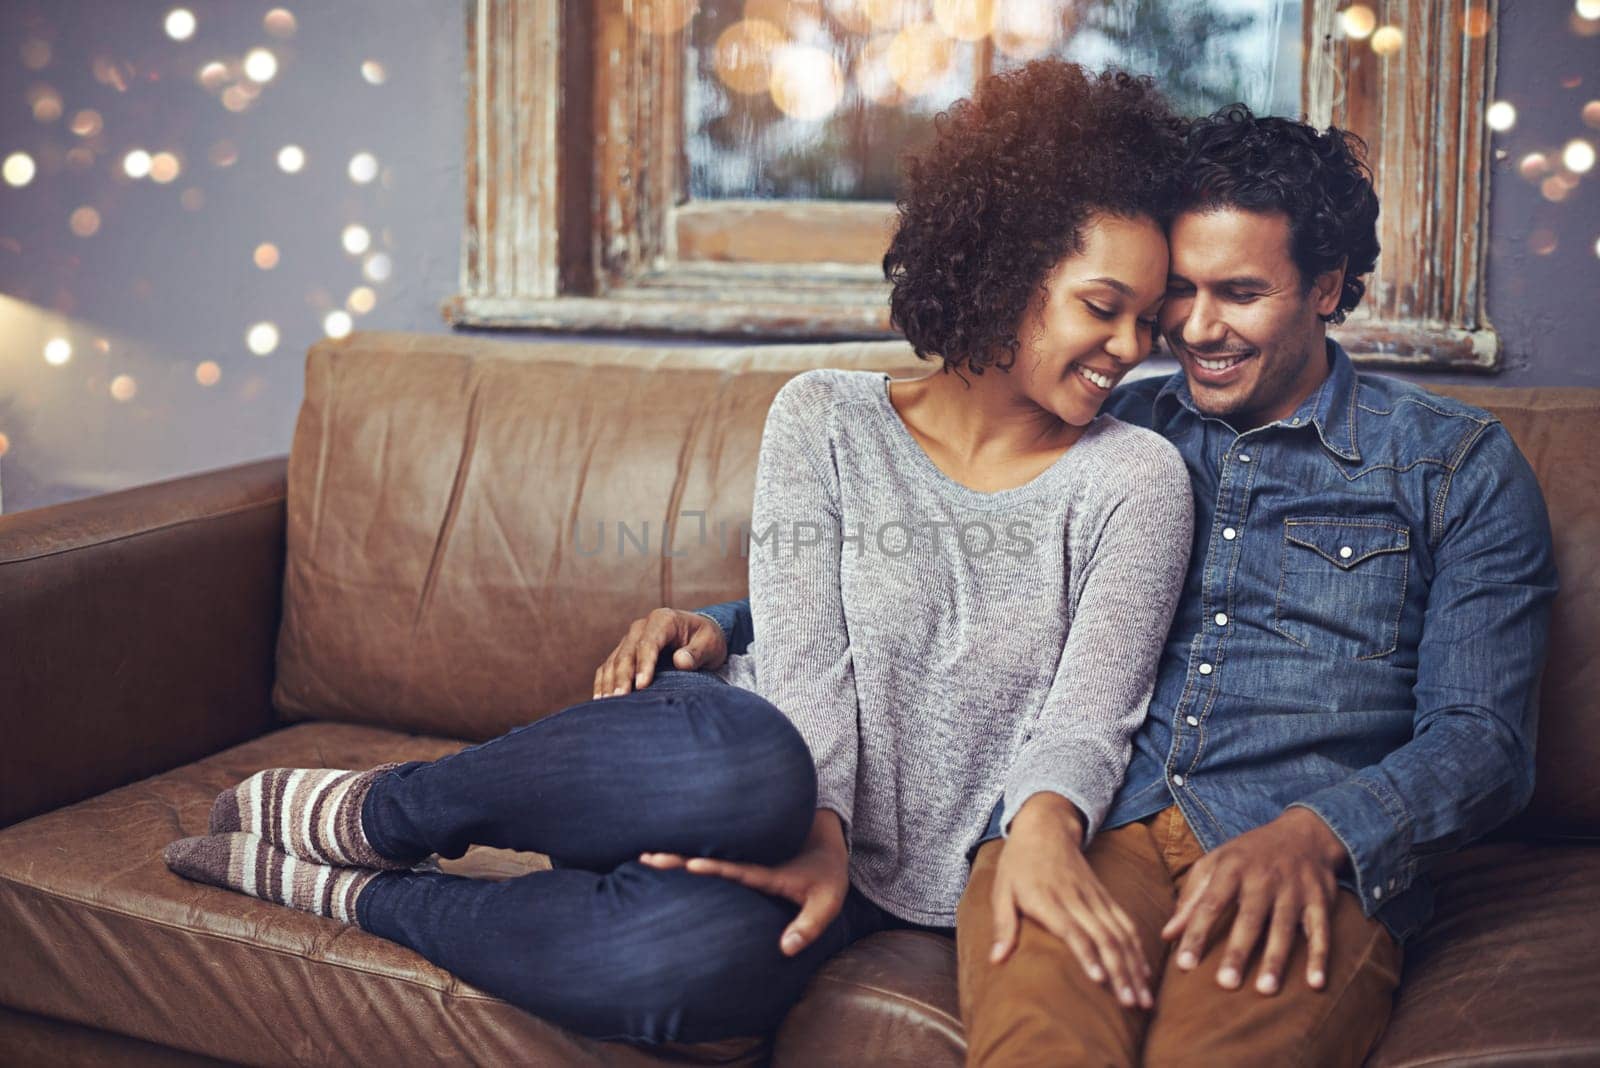 Hug, love and happy couple relax on a sofa, romantic and bonding on date night with bokeh. Interracial relationship, romance and man embrace woman on a couch, smile and chilling in a living room by YuriArcurs